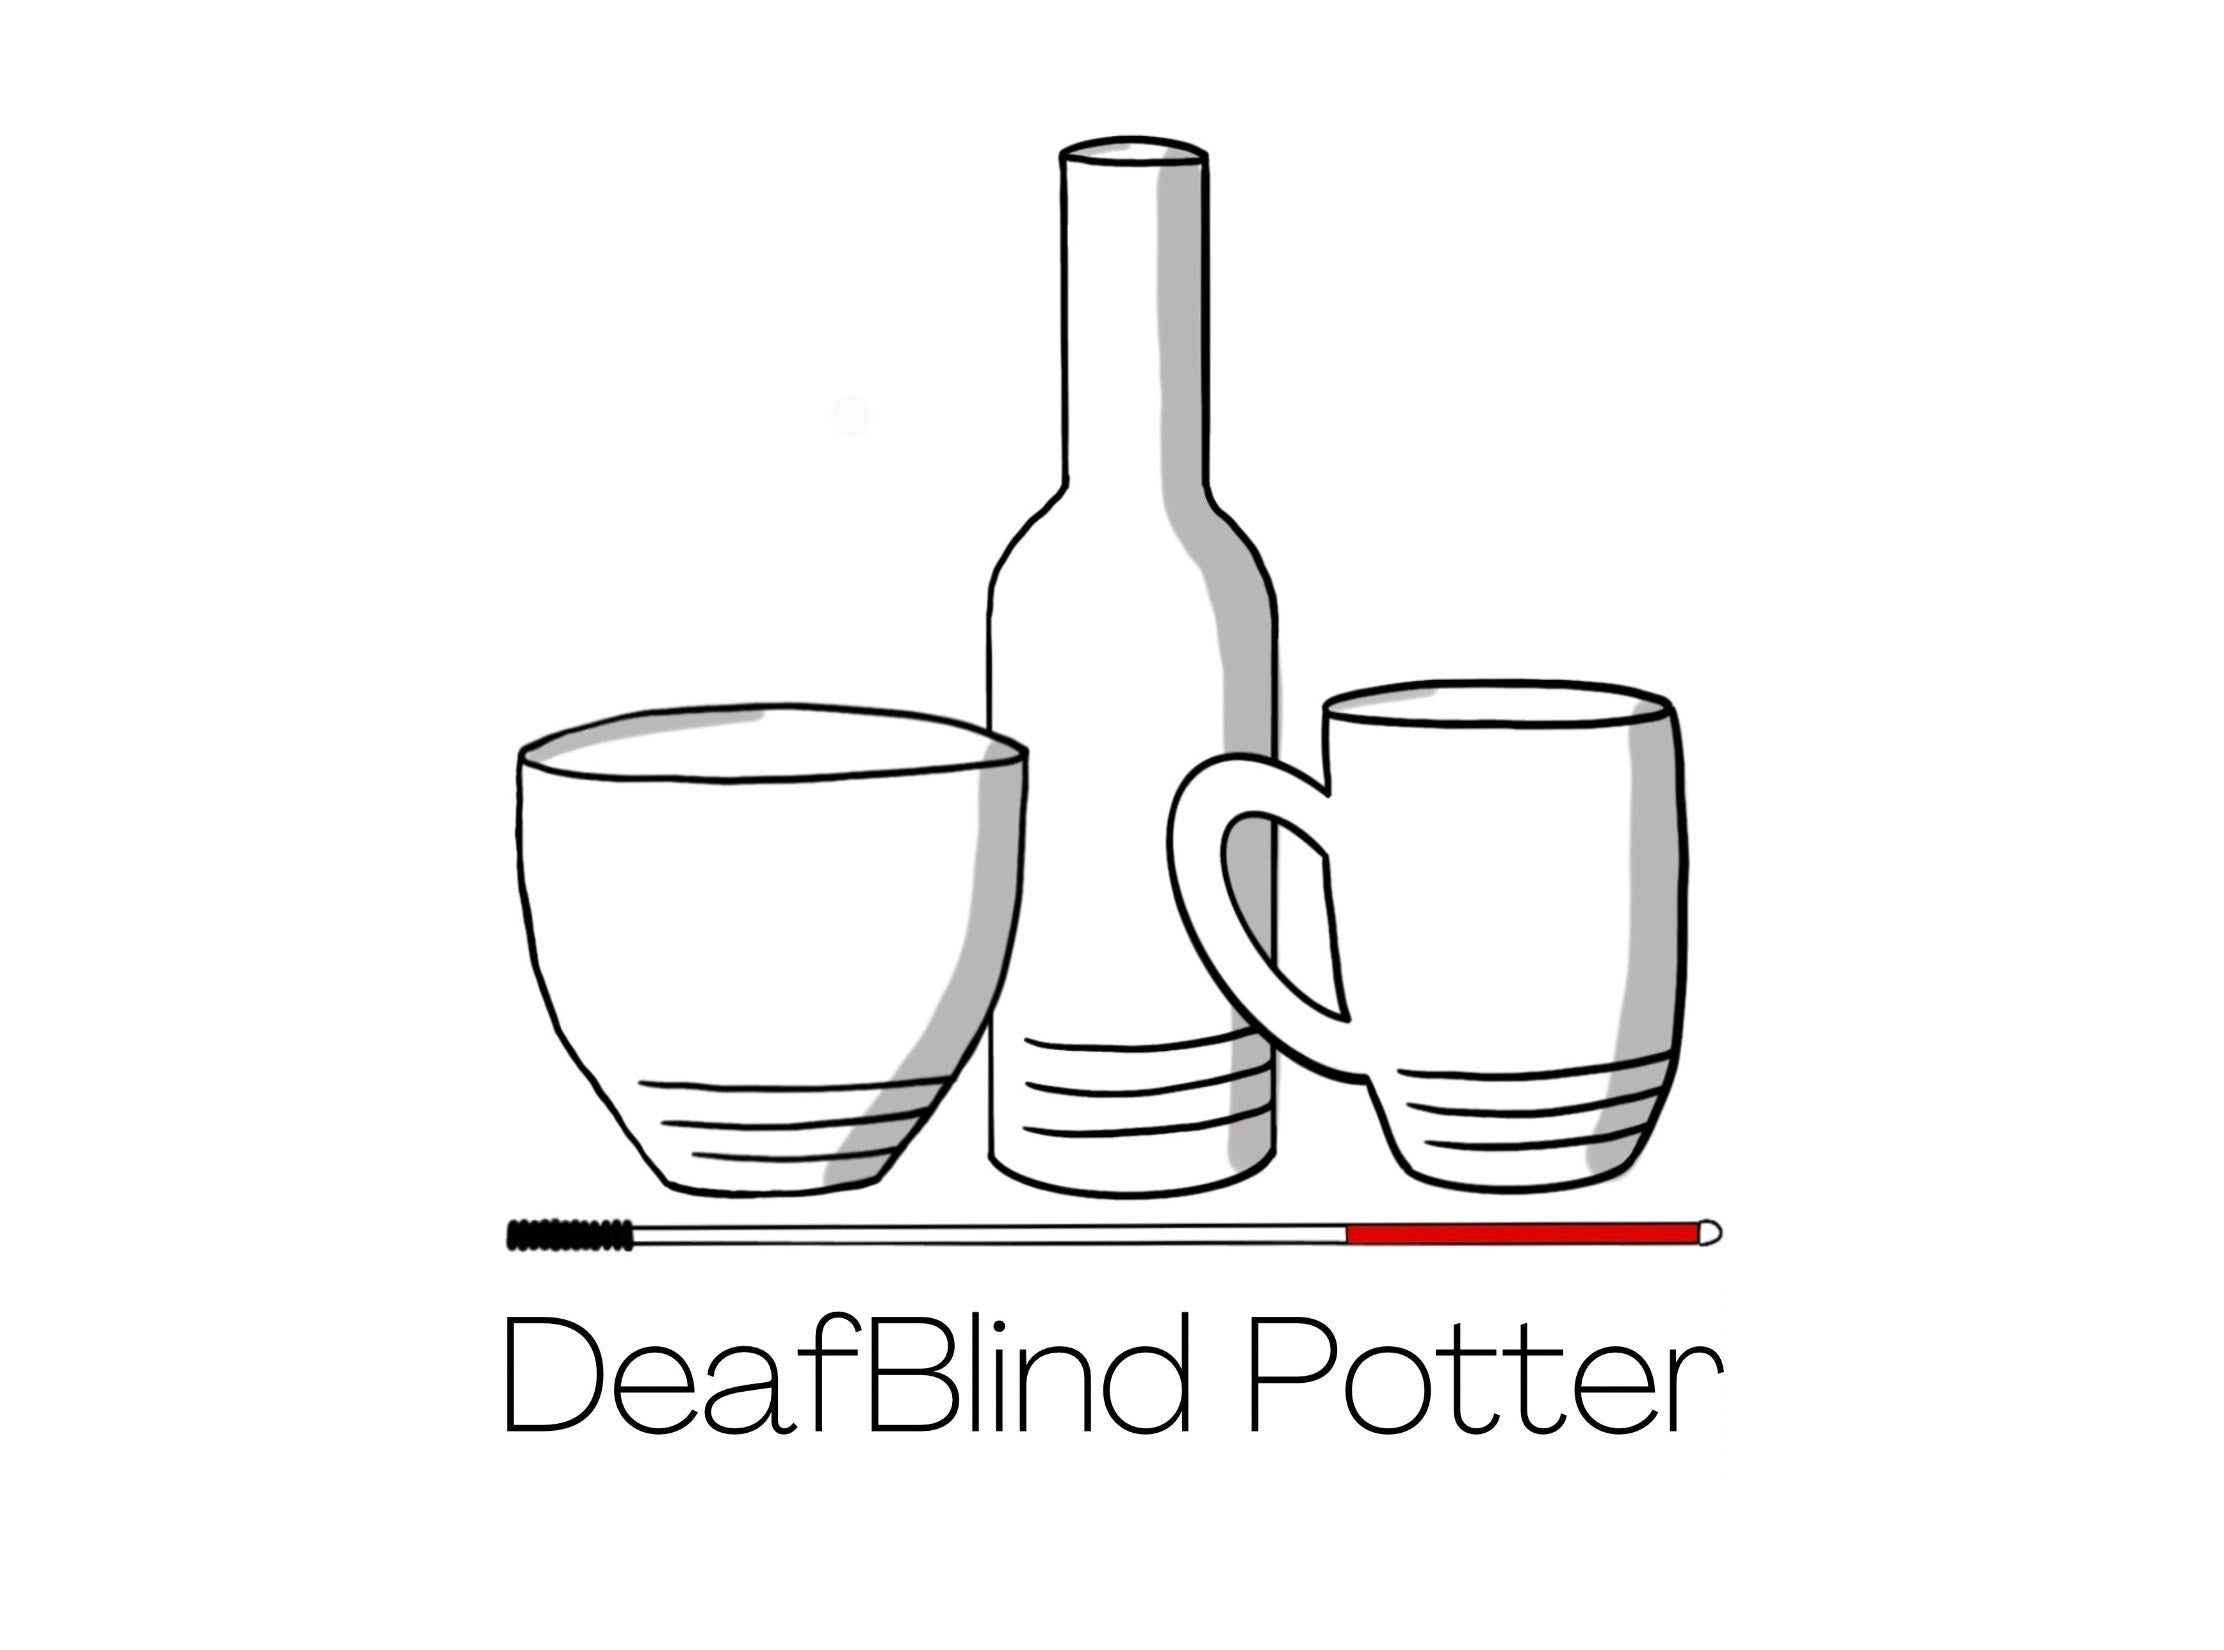 Living beyond your challenges with the DeafBlind Potter - Intuit Blog